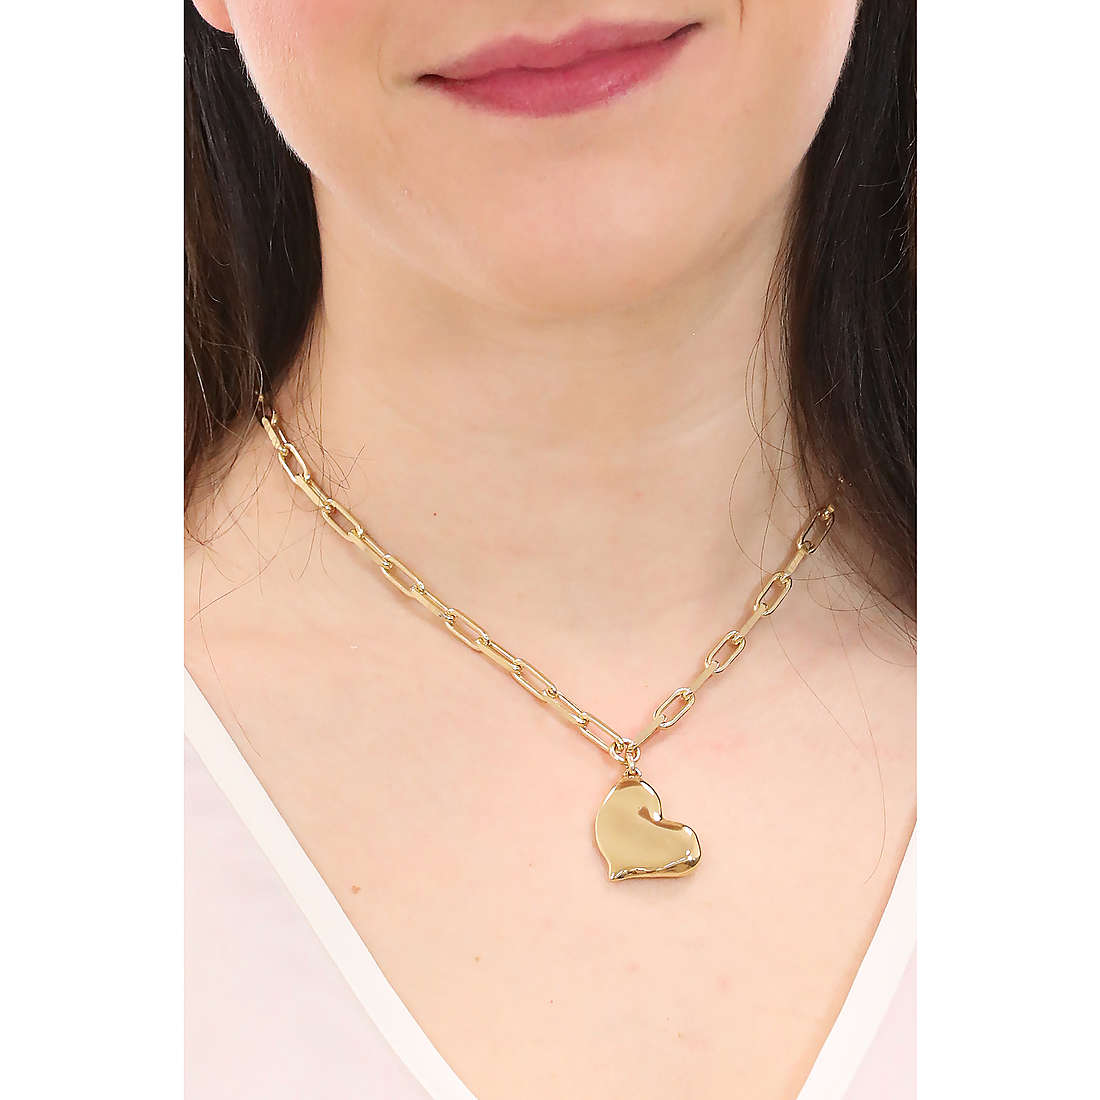 UnoDe50 necklaces Emotions woman COL1669ORO0000U wearing